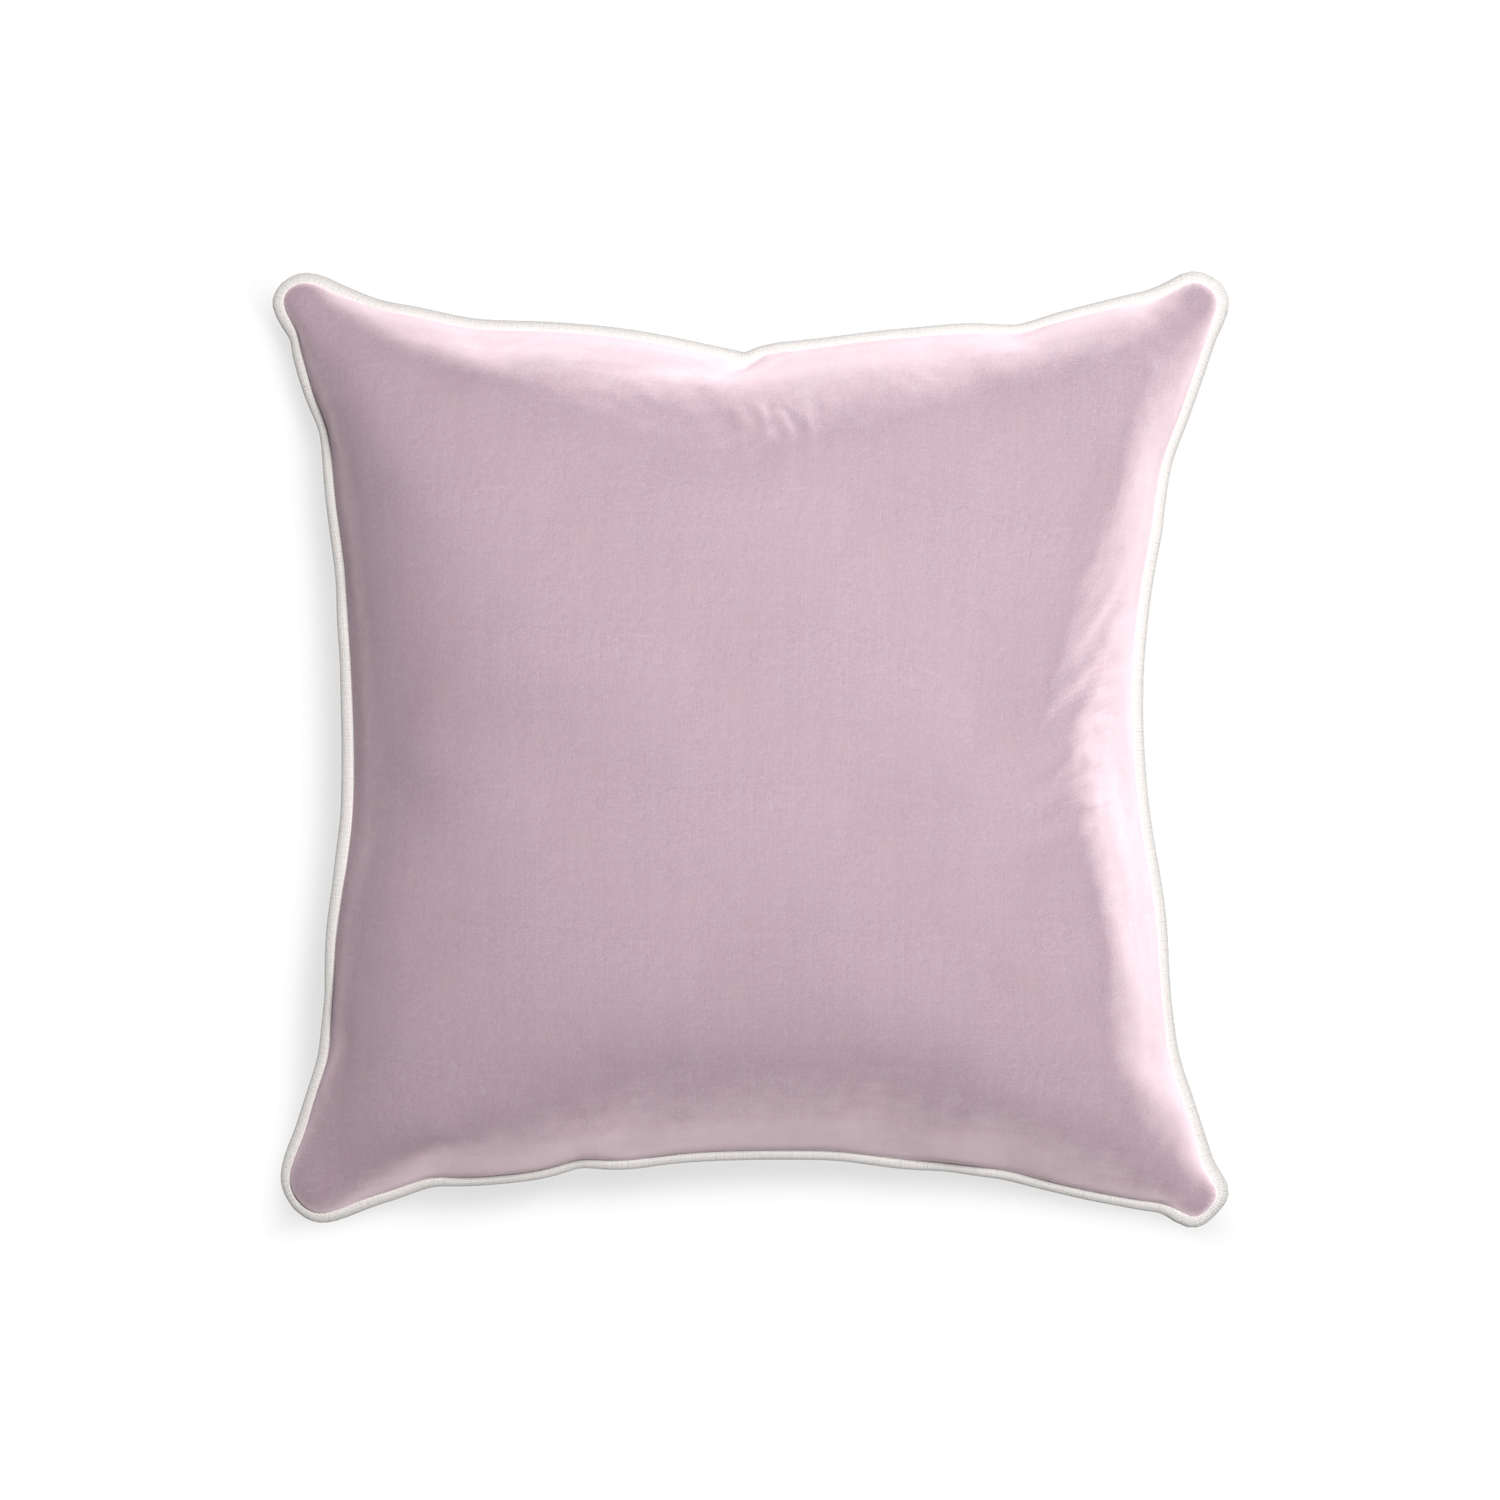 20-square lilac velvet custom pillow with snow piping on white background